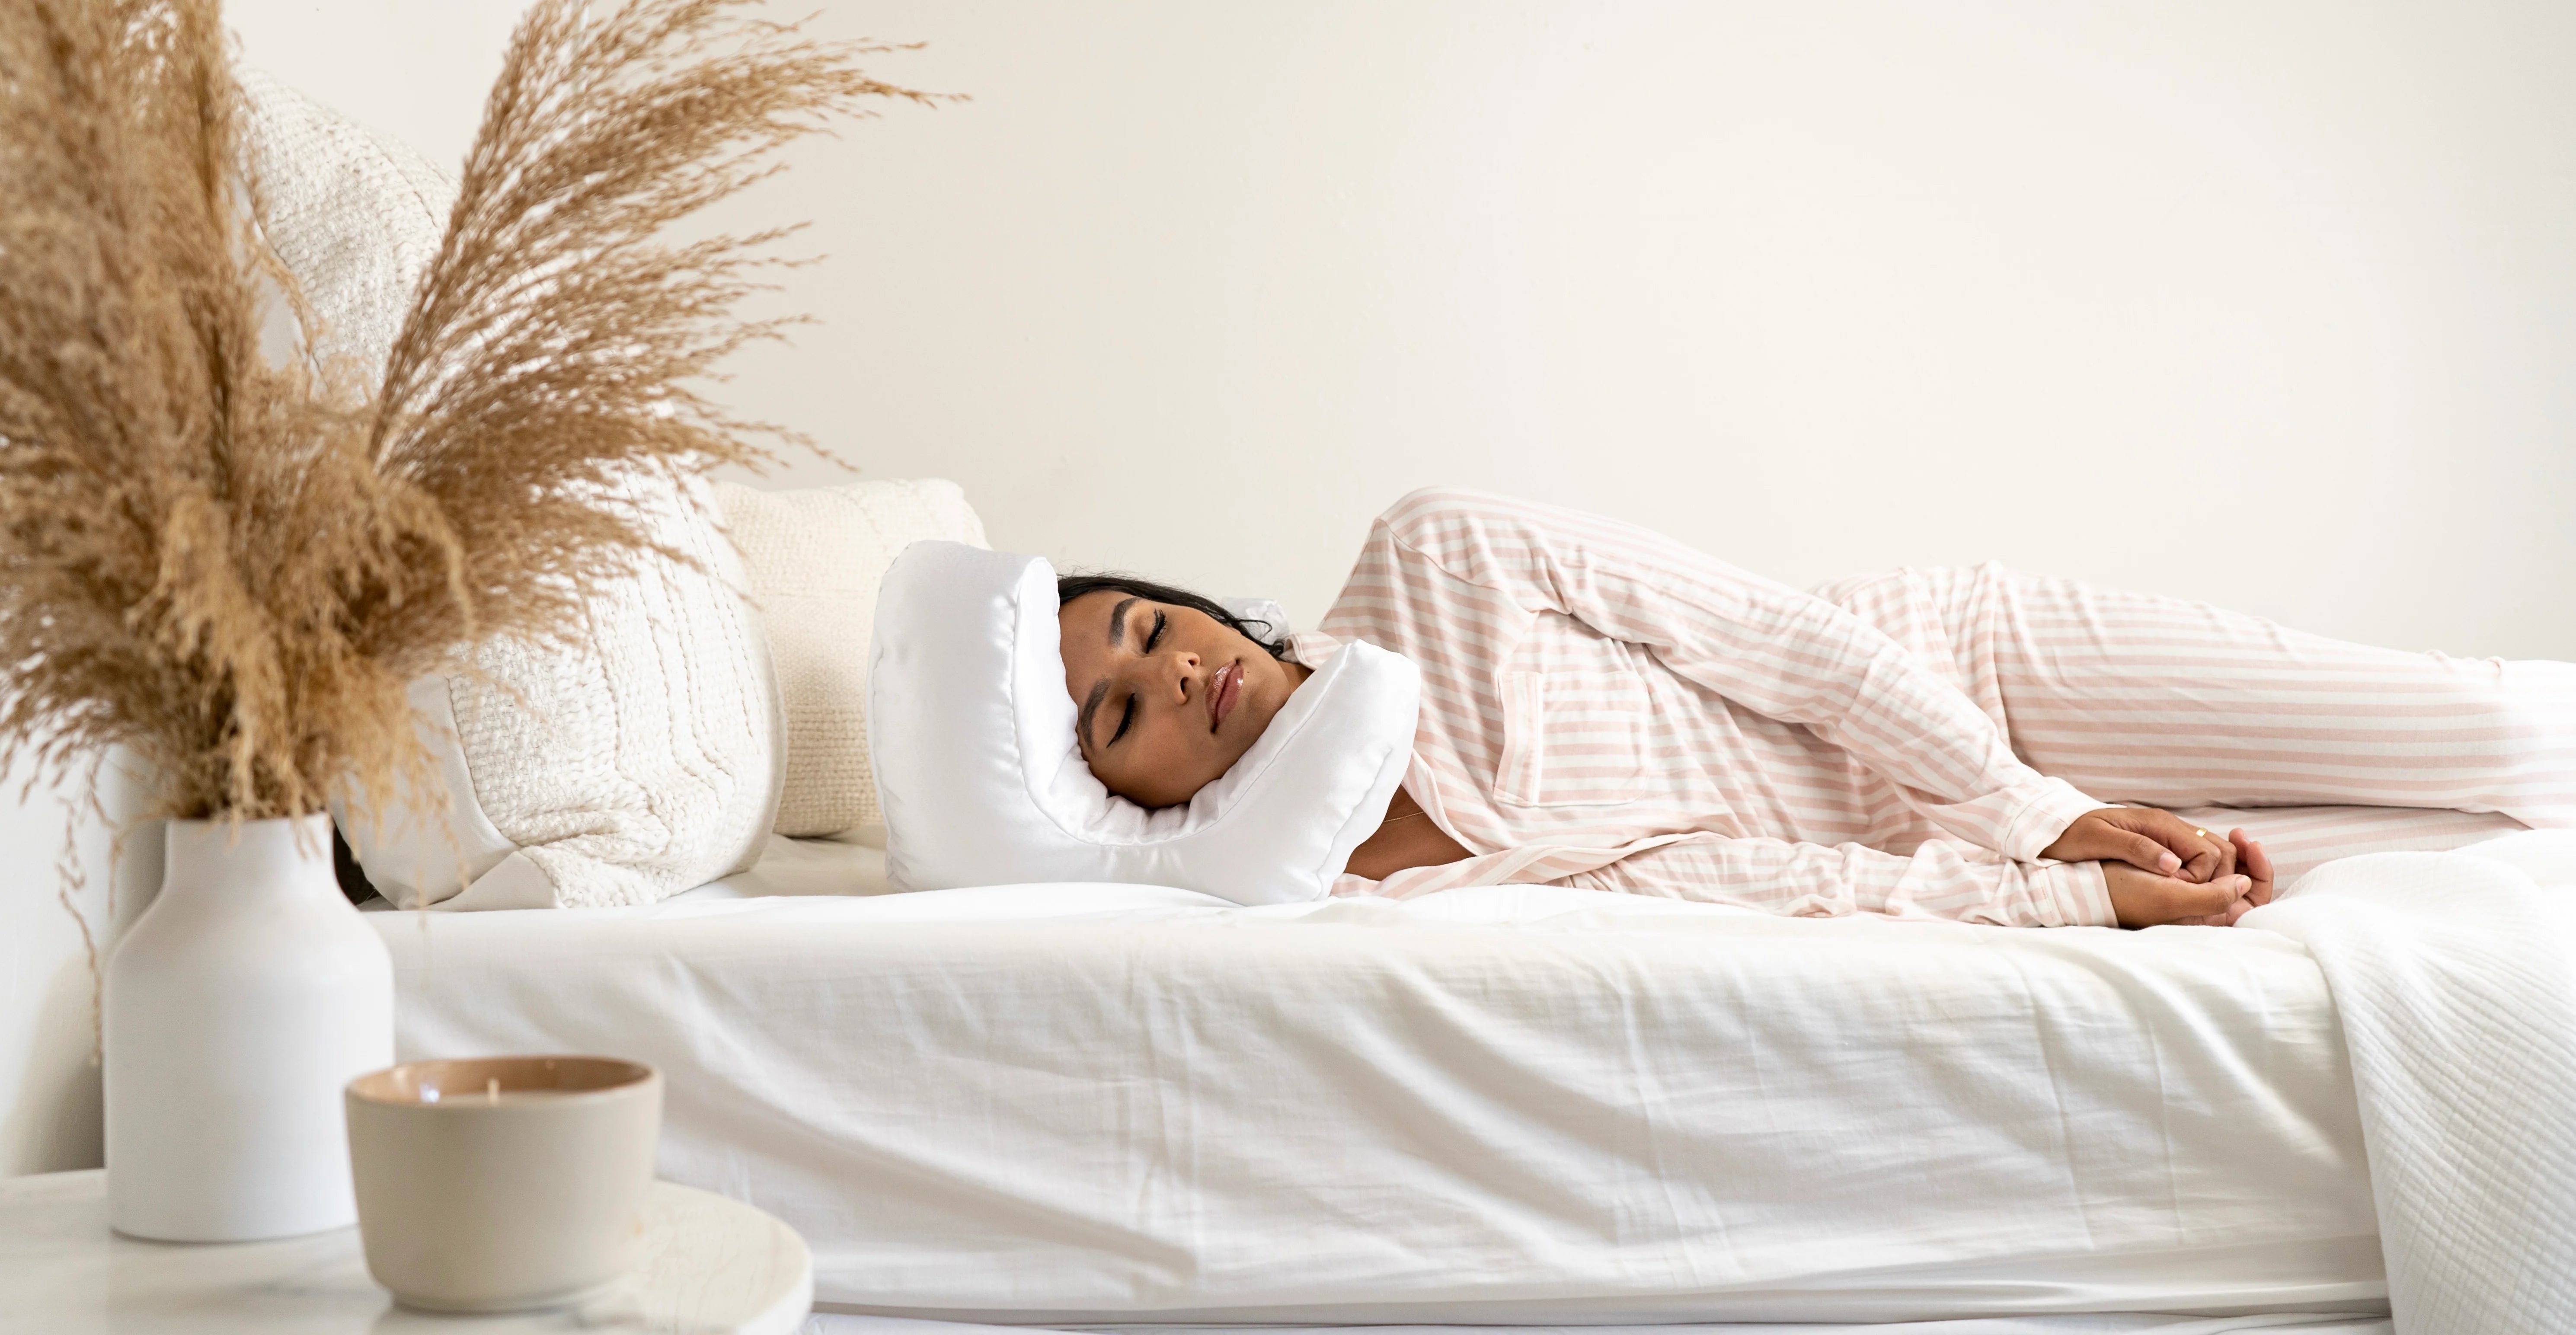 Your Face Pillow: This anti-ageing pillow has hundreds of positive